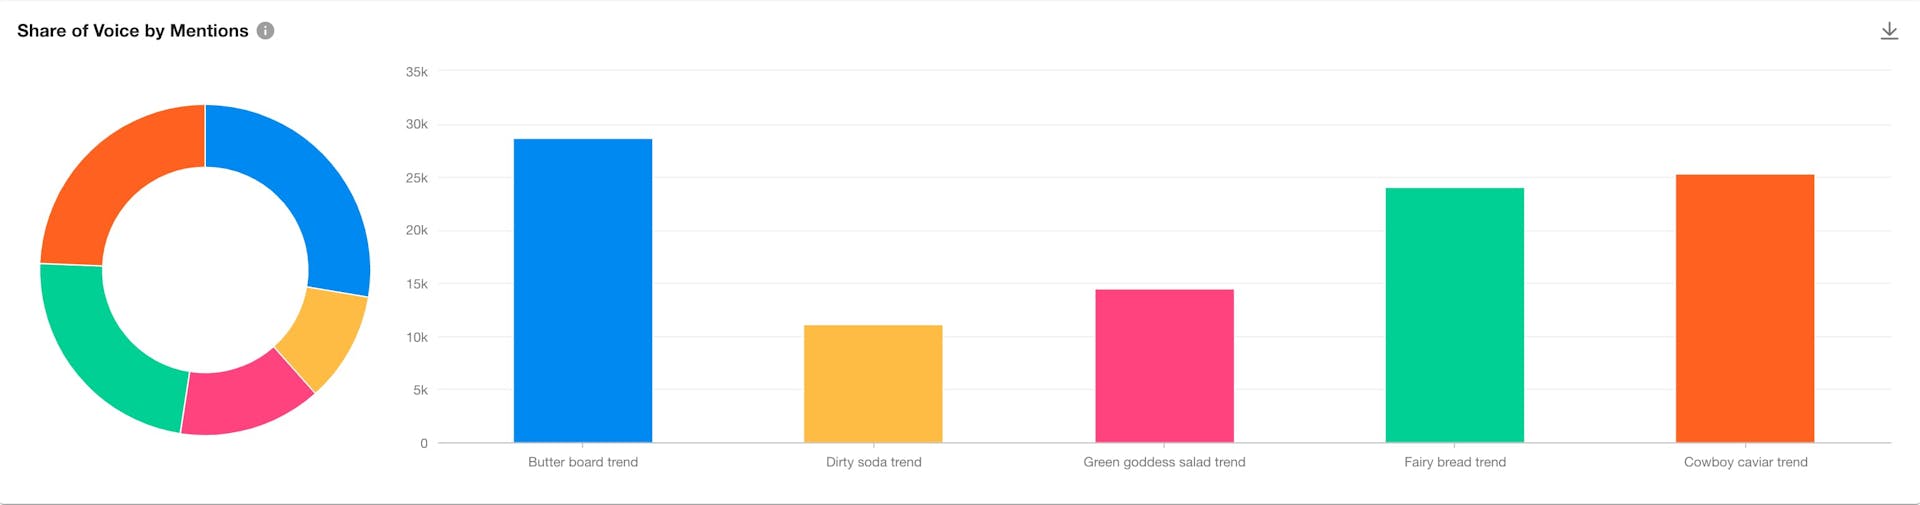 Screenshot from the Meltwater social listening platform of a ring chart and bar graph of five food trends' shares of voice by mentions.